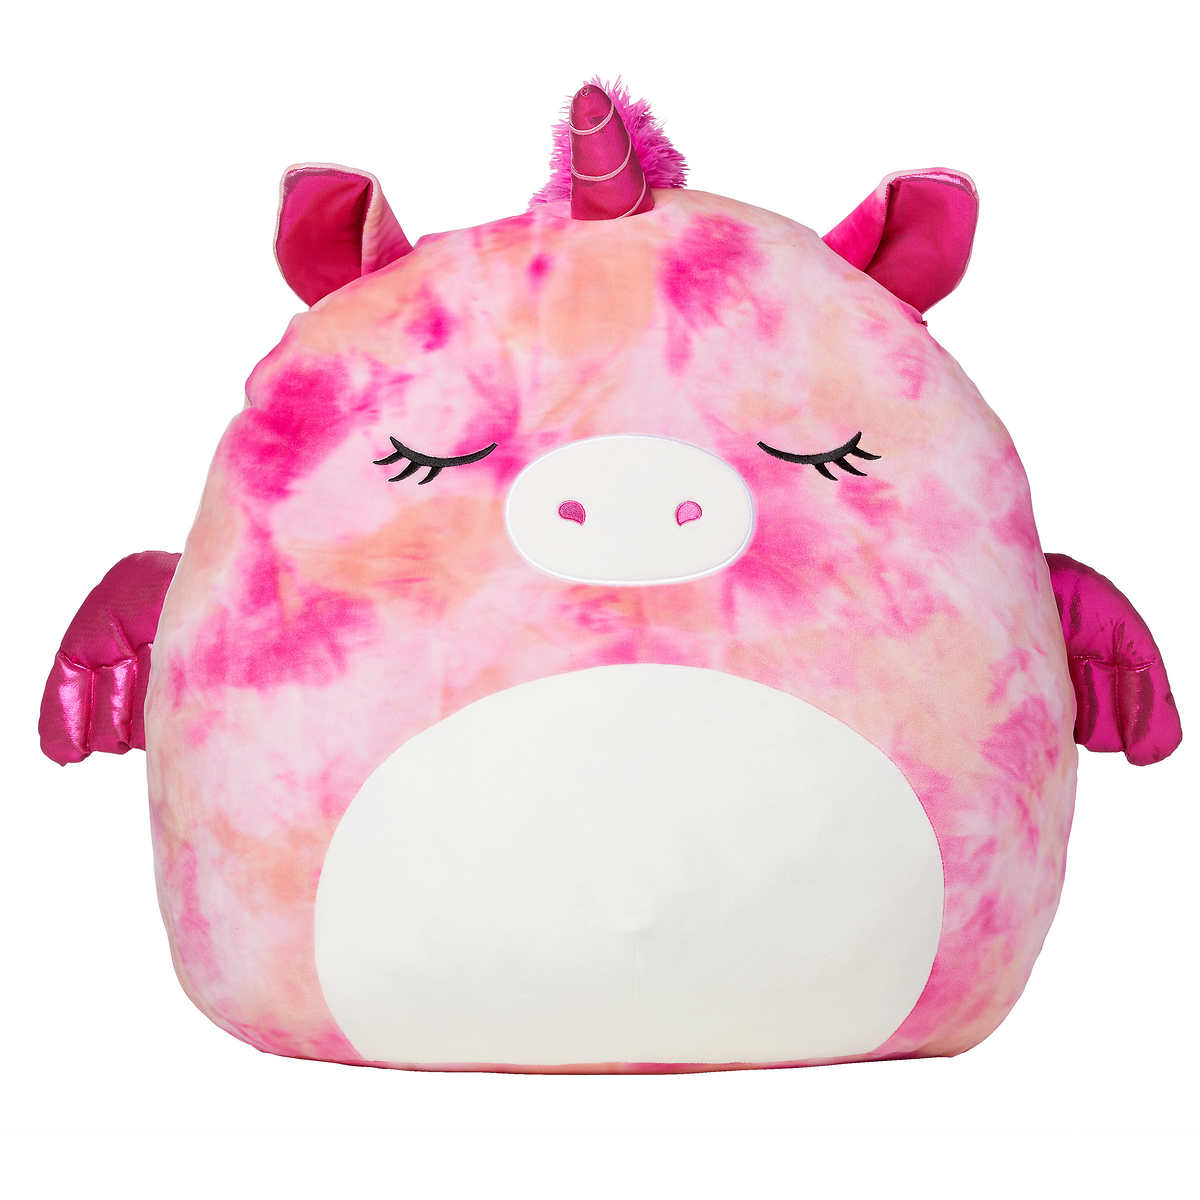 Hocus Pocus Squishmallows Are 20% Off — & Shoppers Are Running